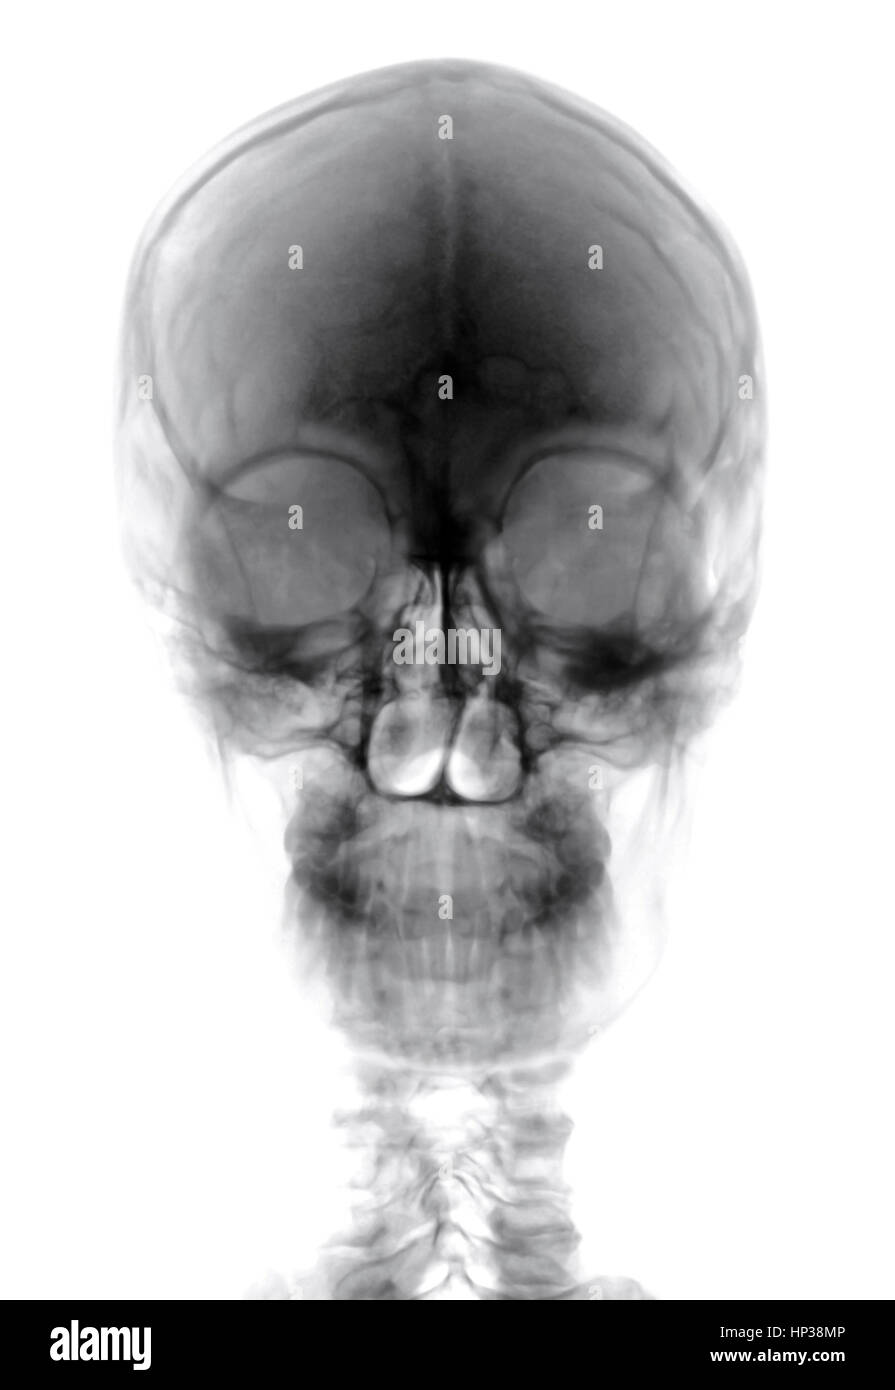 Human Head on Black and white x-ray film Stock Photo